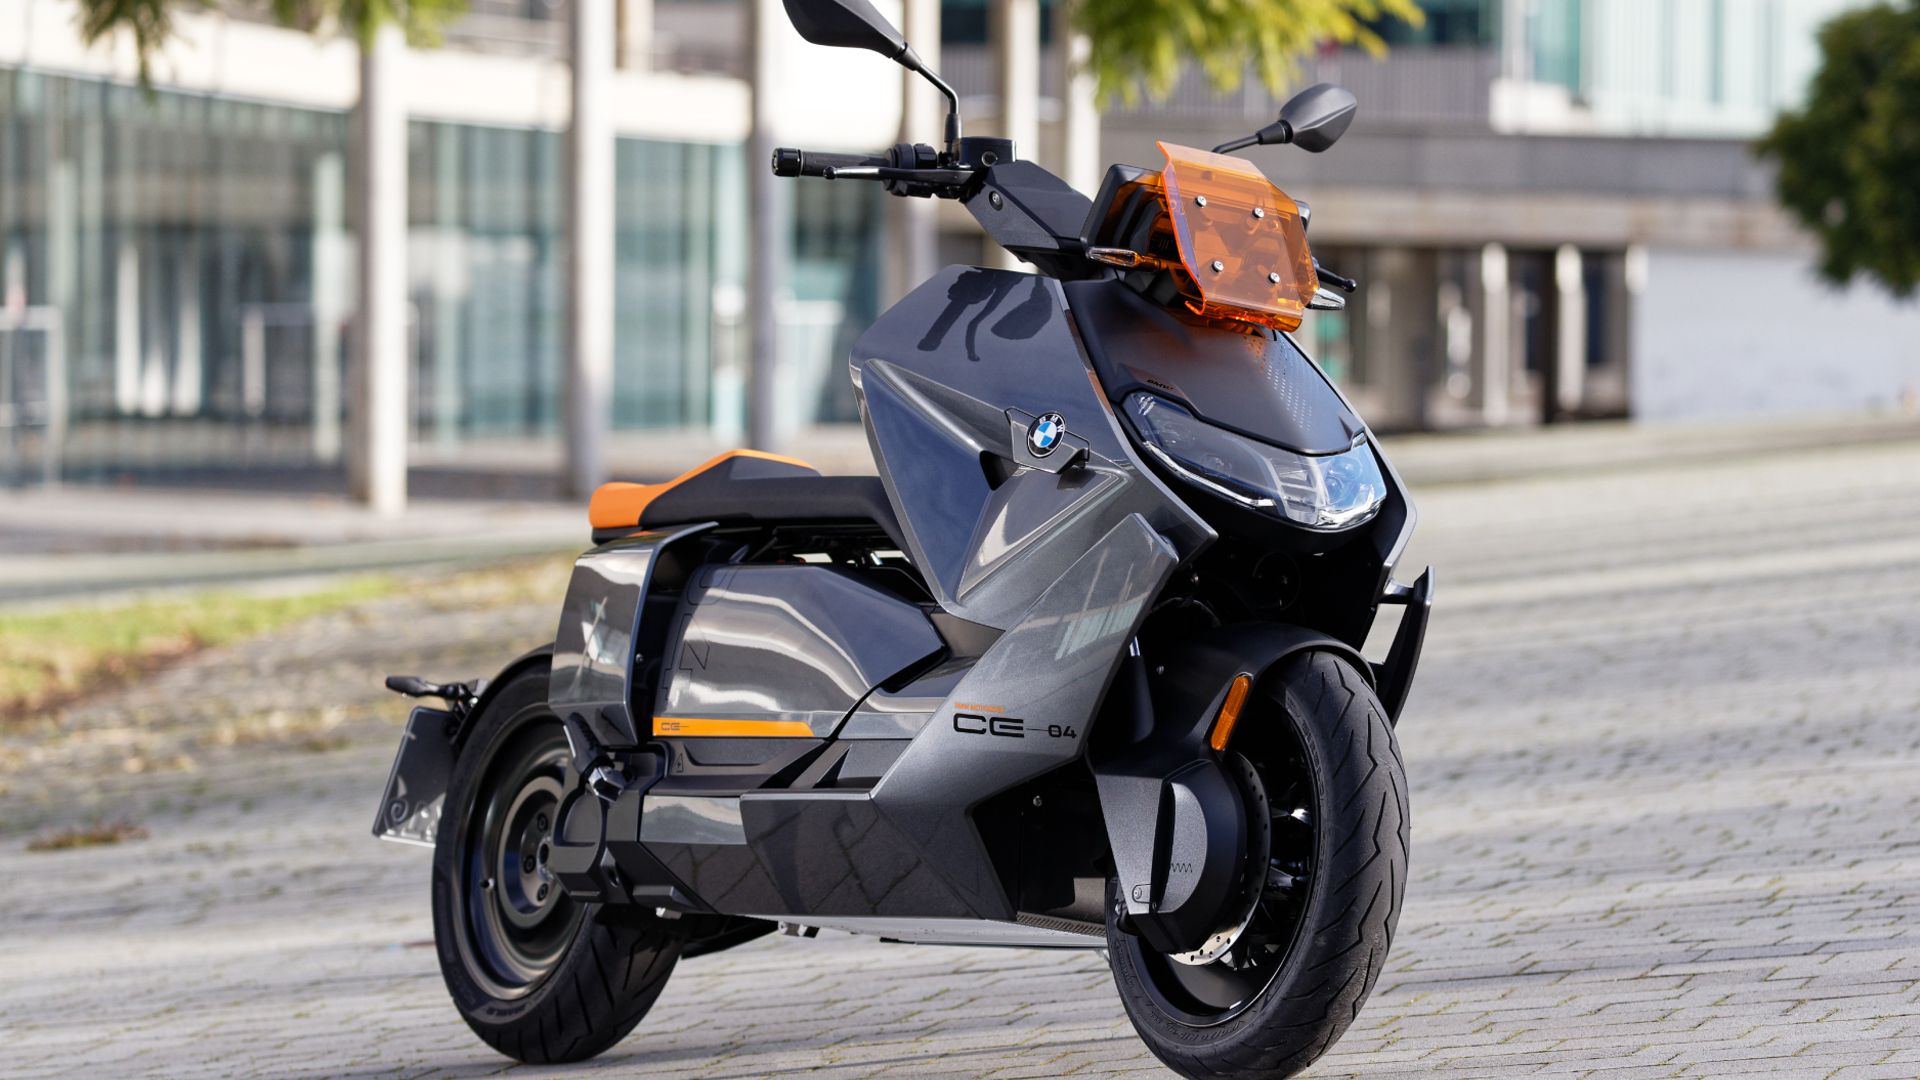 BMW opens bookings for CE 04 electric scooter in India (Source: BMW)